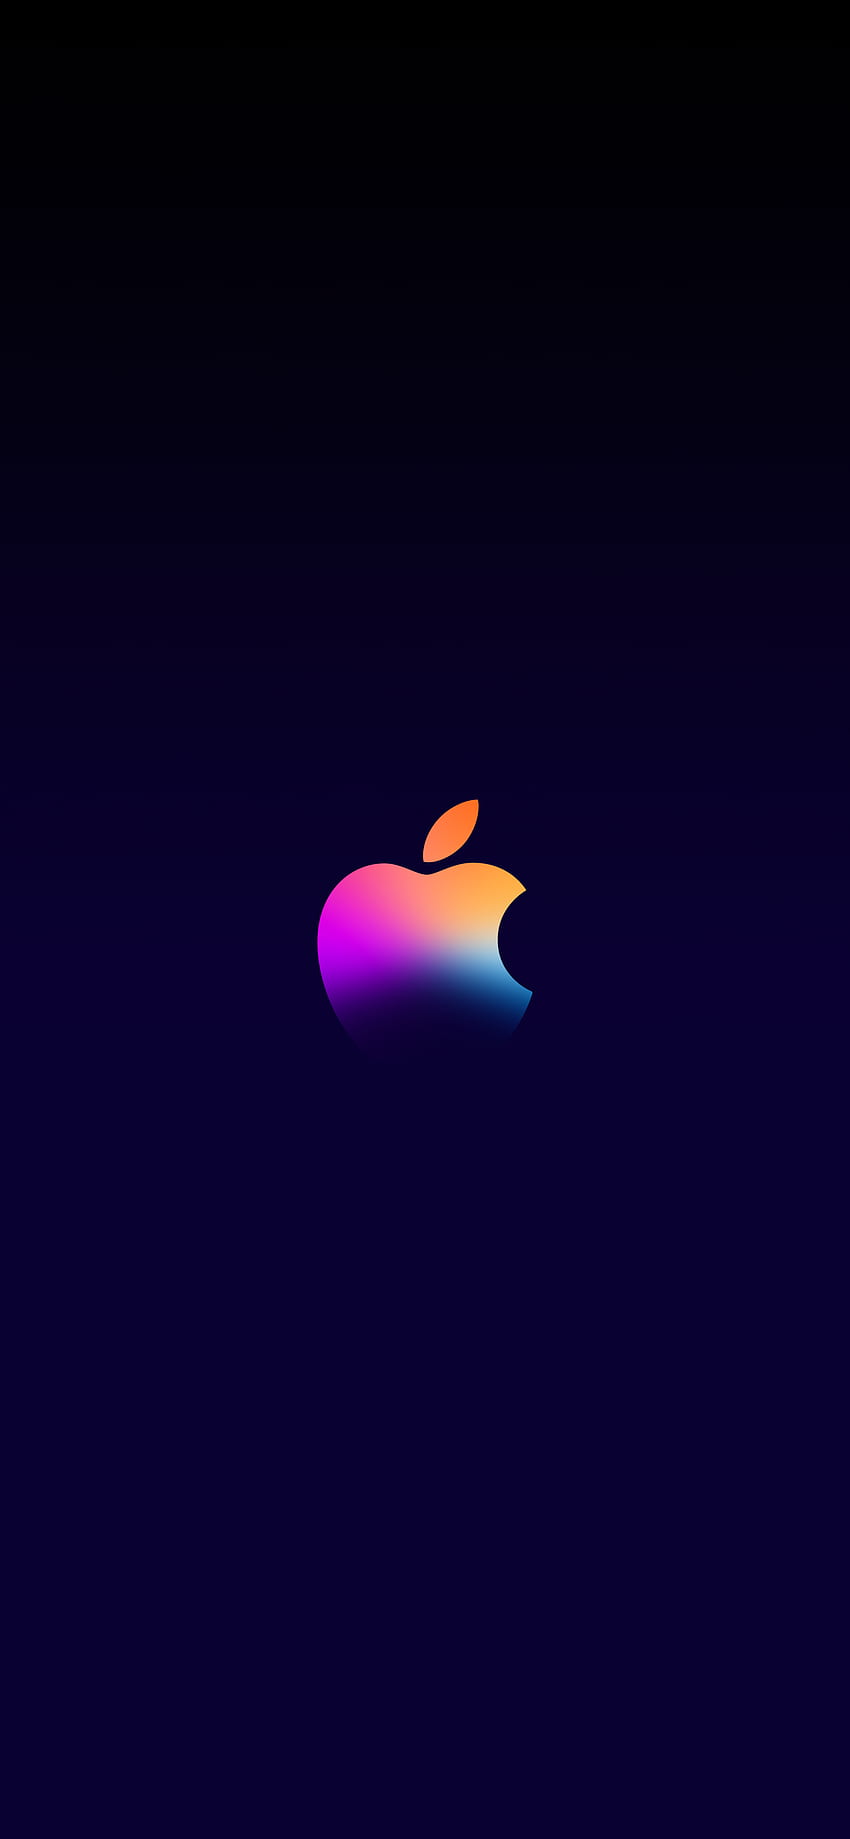 Apple Event One More Thing - Central in 2021. Apple logo, Apple iphone, Apple HD 전화 배경 화면